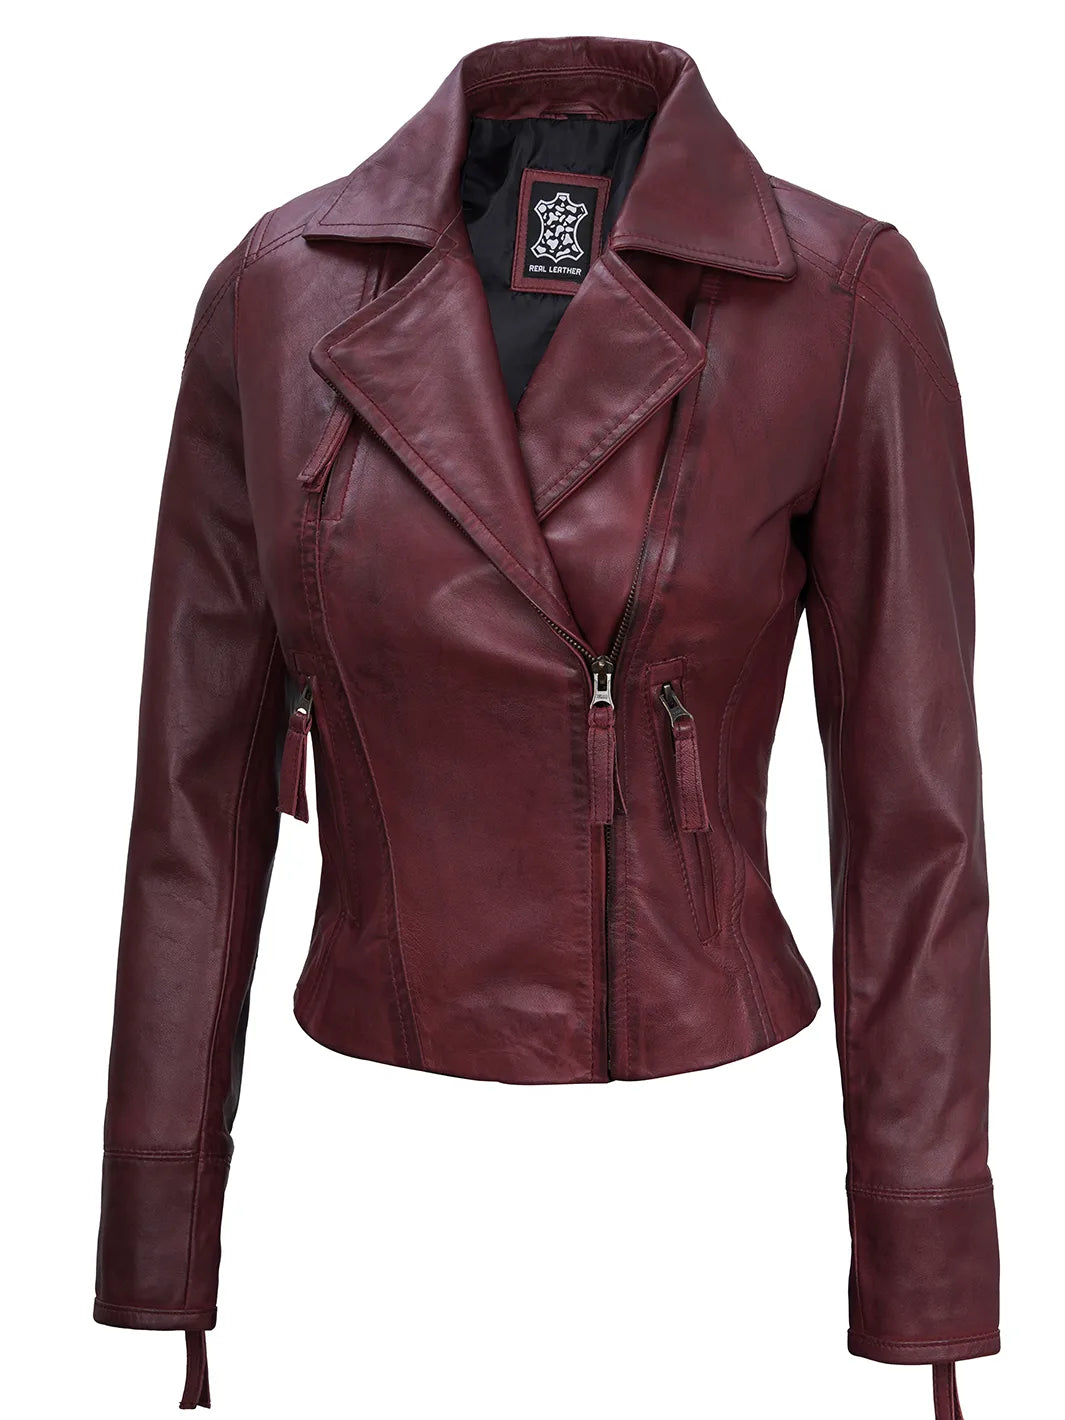 Maroon leather jacket for womens